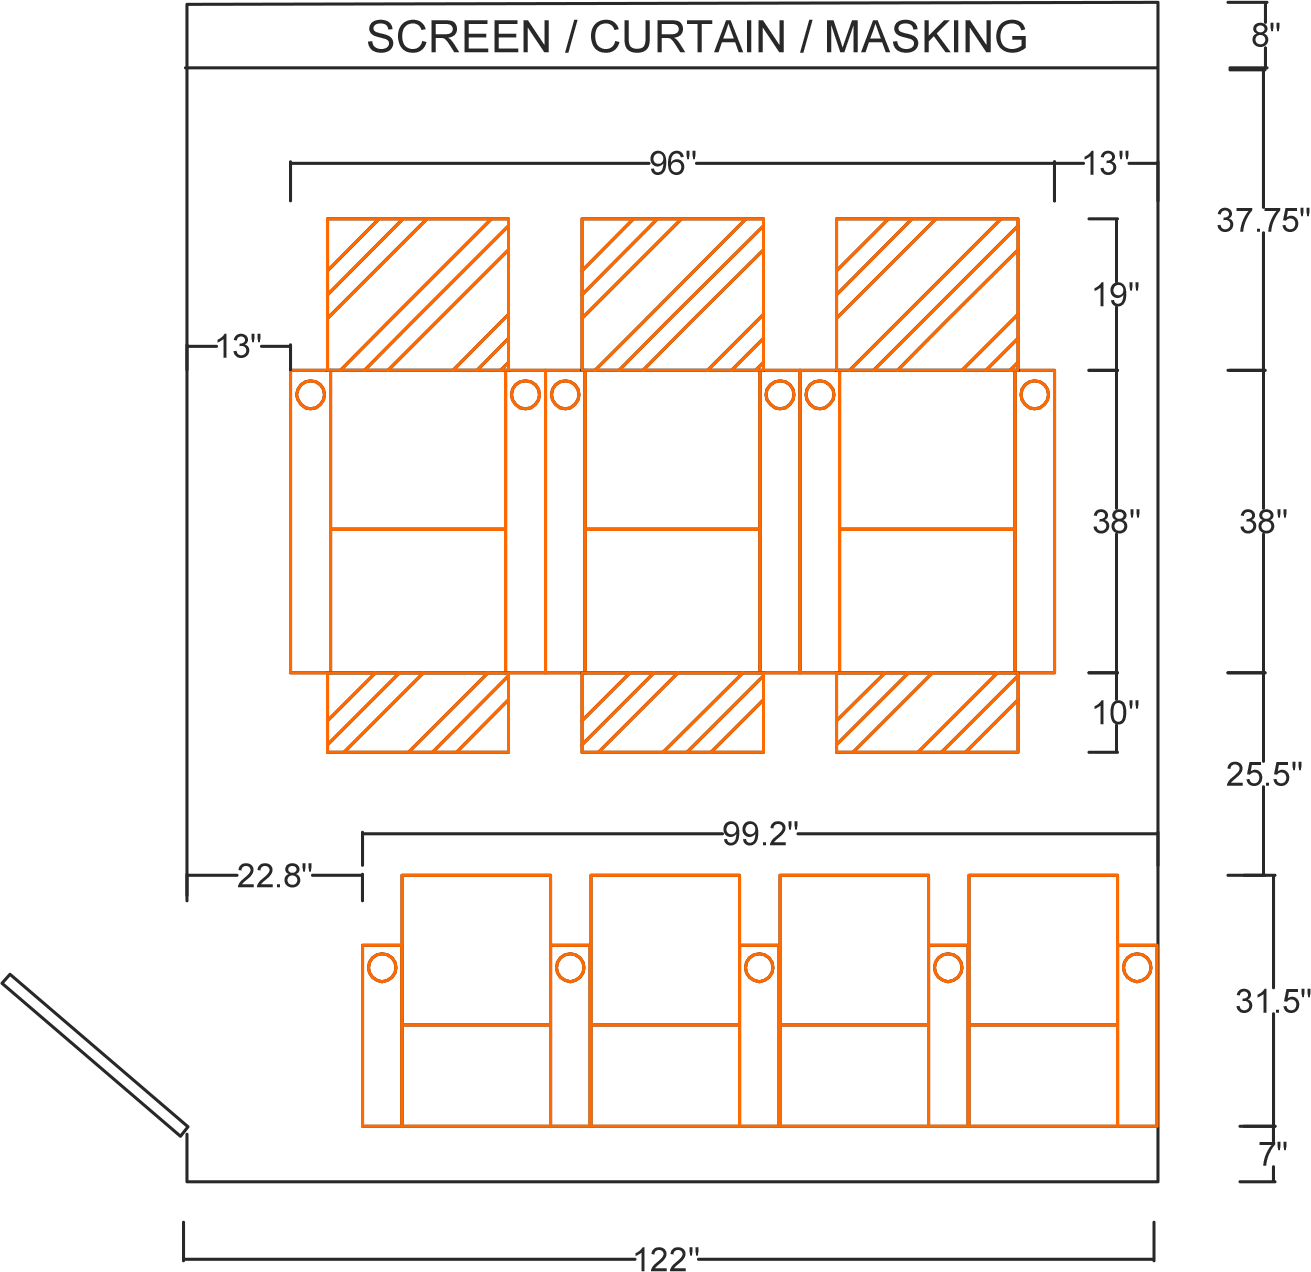 CAD sketch of a home theater design.